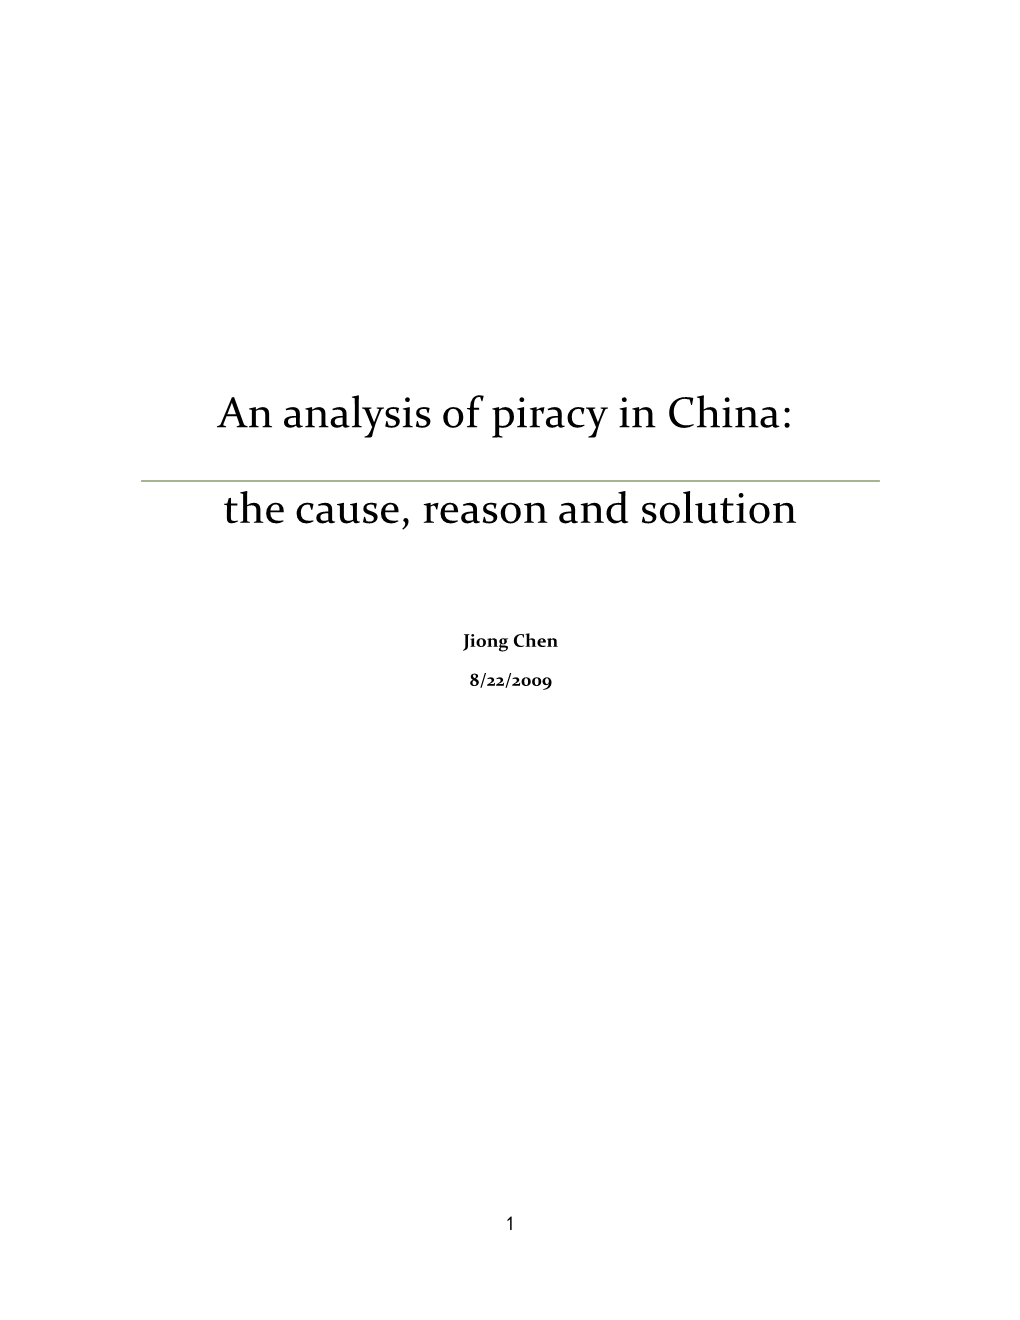 An Analysis of Piracy in China: the Cause, Reason and Solution